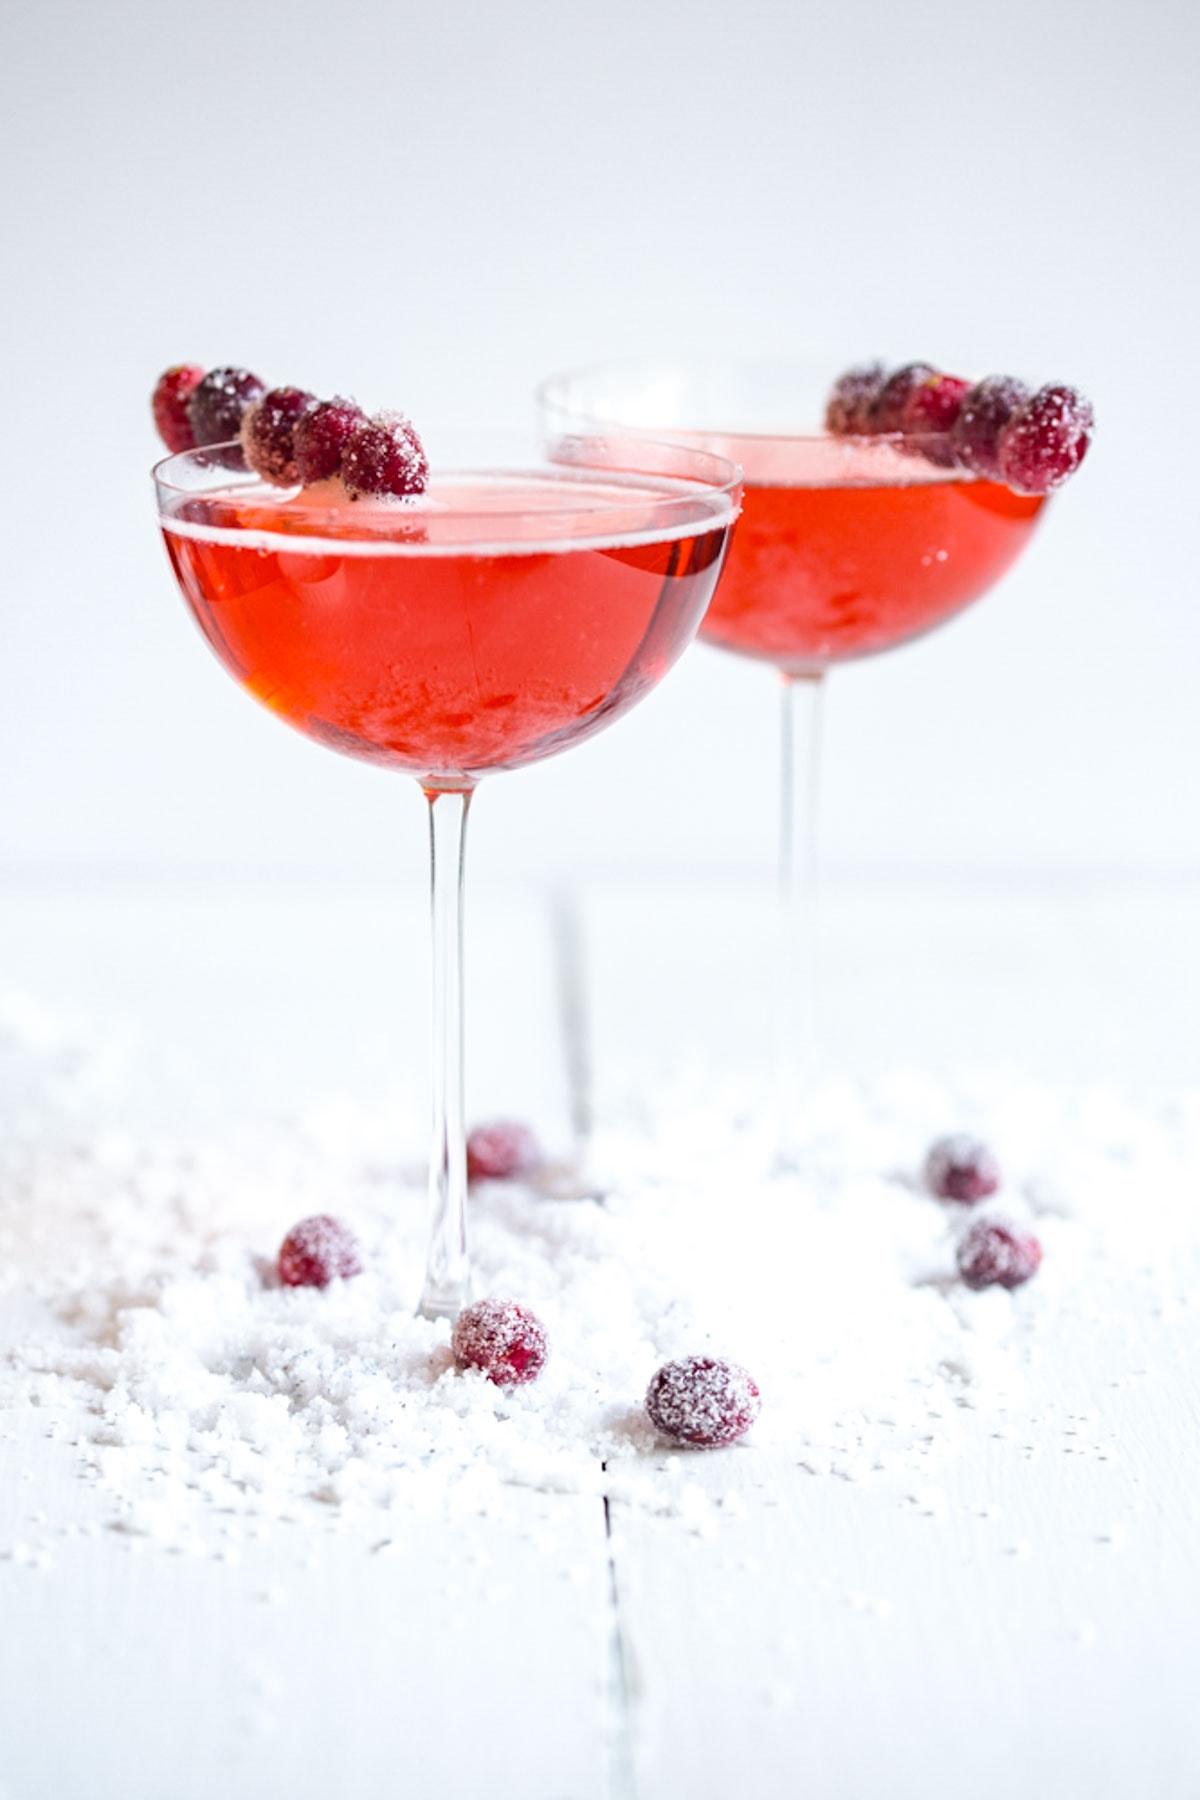 Two cocktail glasses holding bright red cranberry-elderflower champagne sparklers on a white table with sugared cranberries.